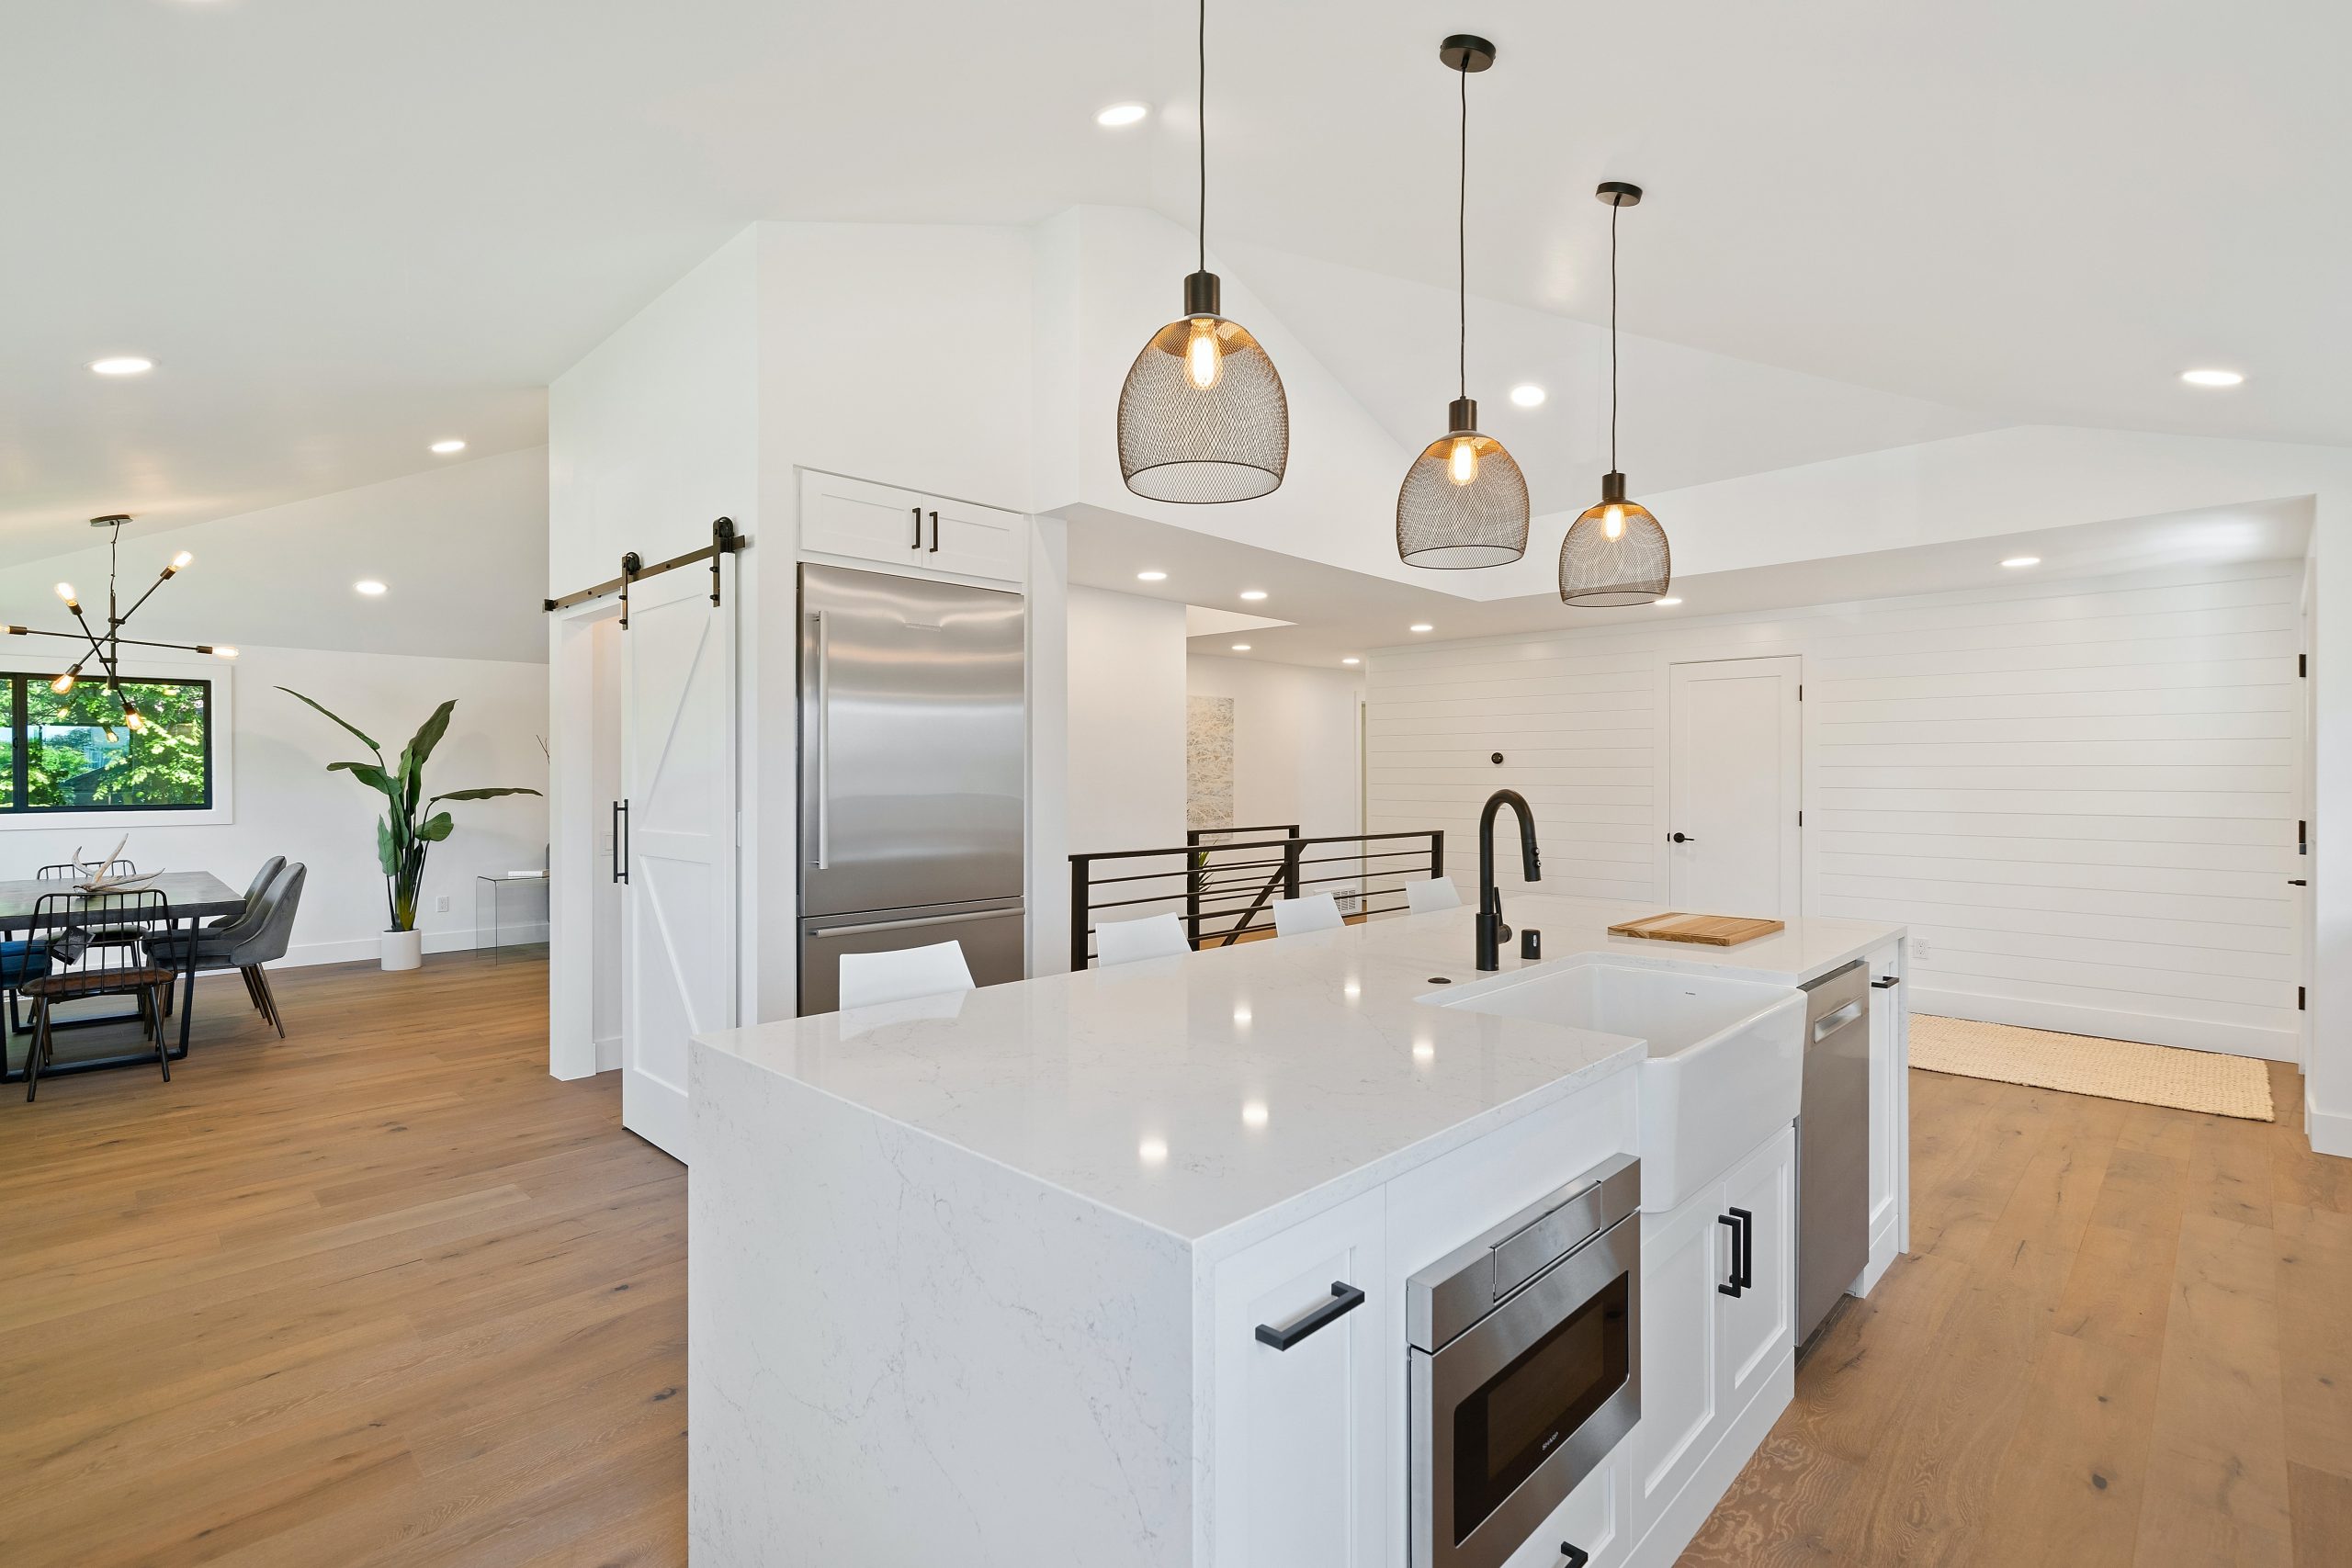 The image features a shiny white kitchen counter with three pendant lights overhanging the counter.